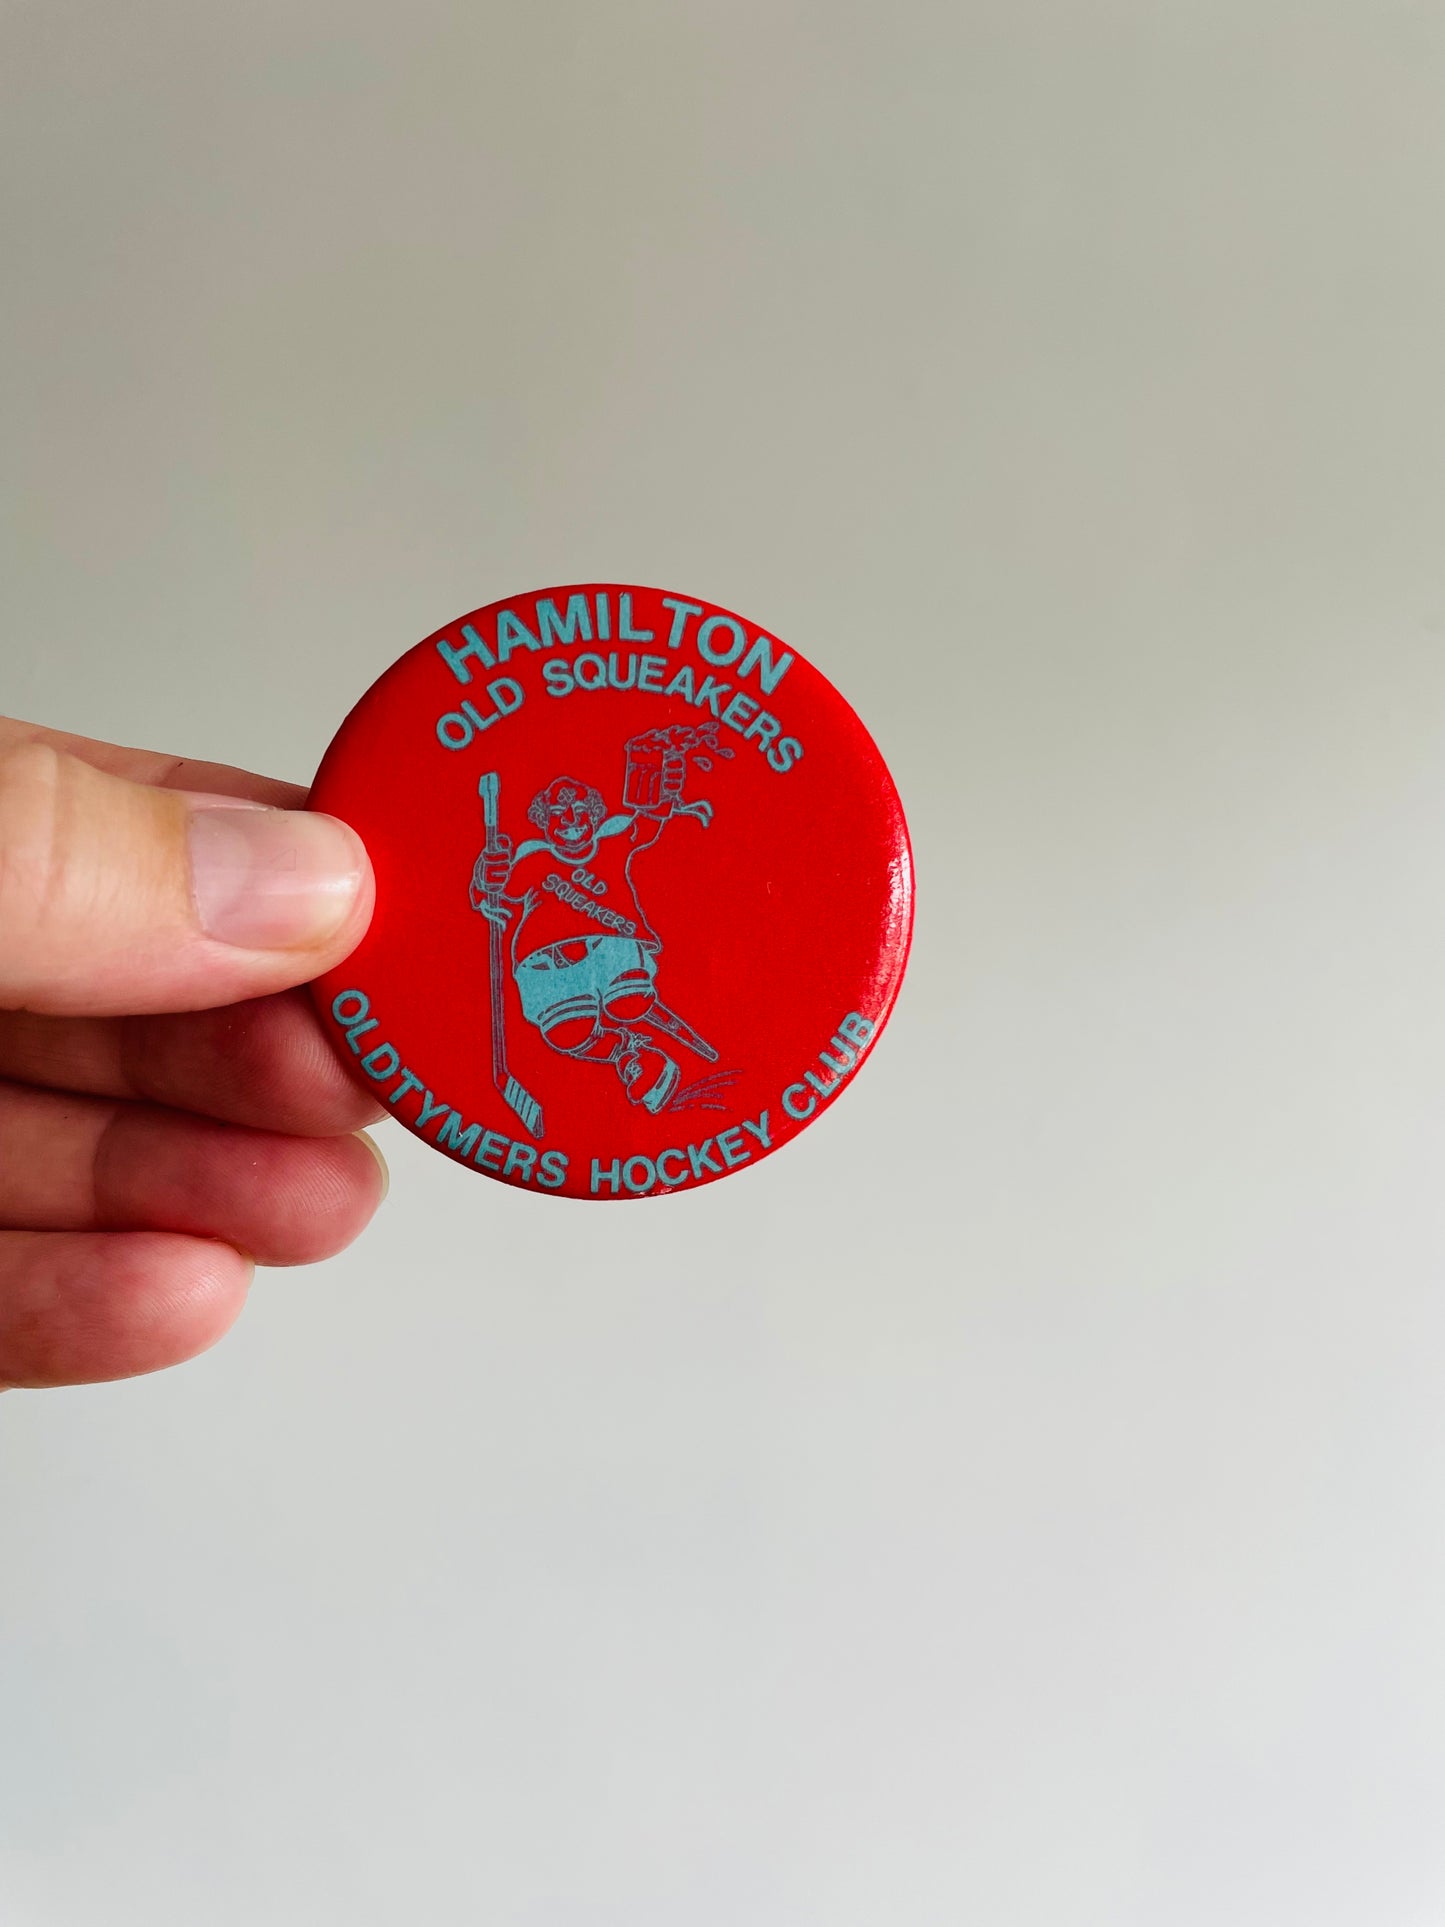 Vintage Metal Hockey Button Pin - Hamilton Old Squeakers Oldtymers Hockey Club